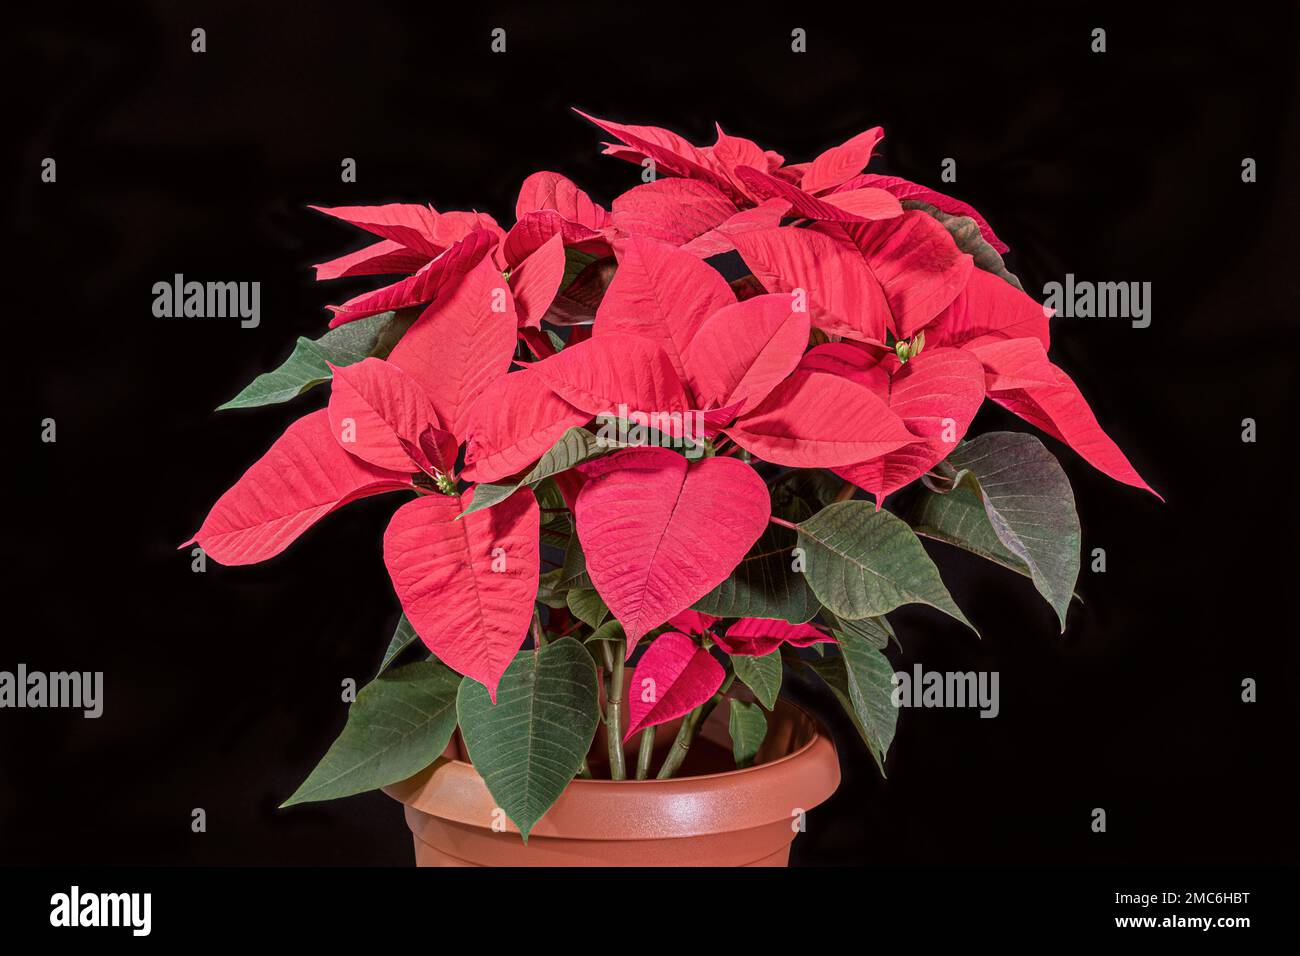 large brilliant red poinsettia plant in a rust colored pot with a black background Stock Photo